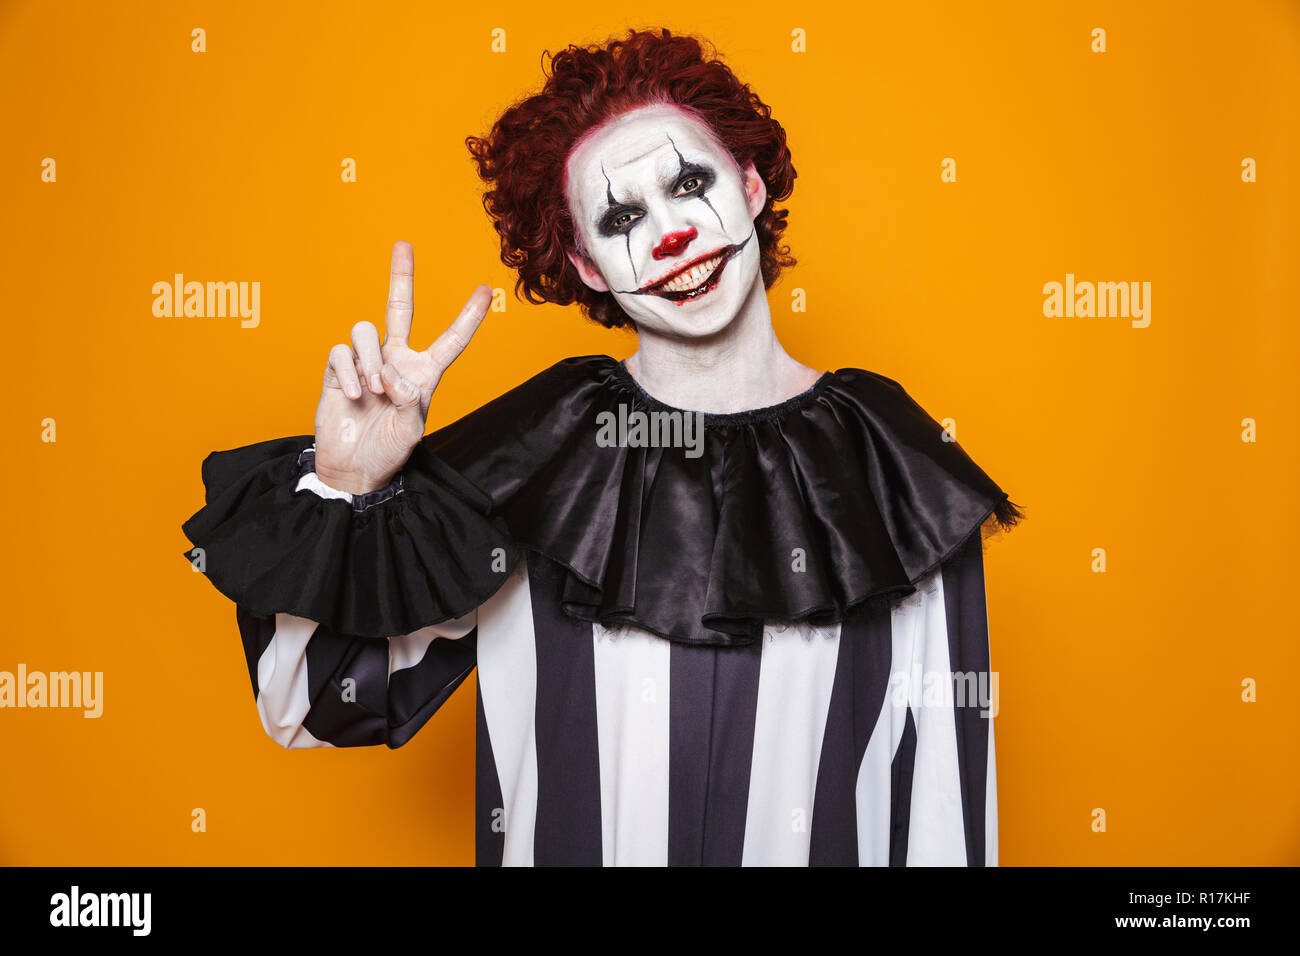 Scary clown man 20s wearing black costume and halloween makeup looking at camera isolated over yellow background Stock Photo